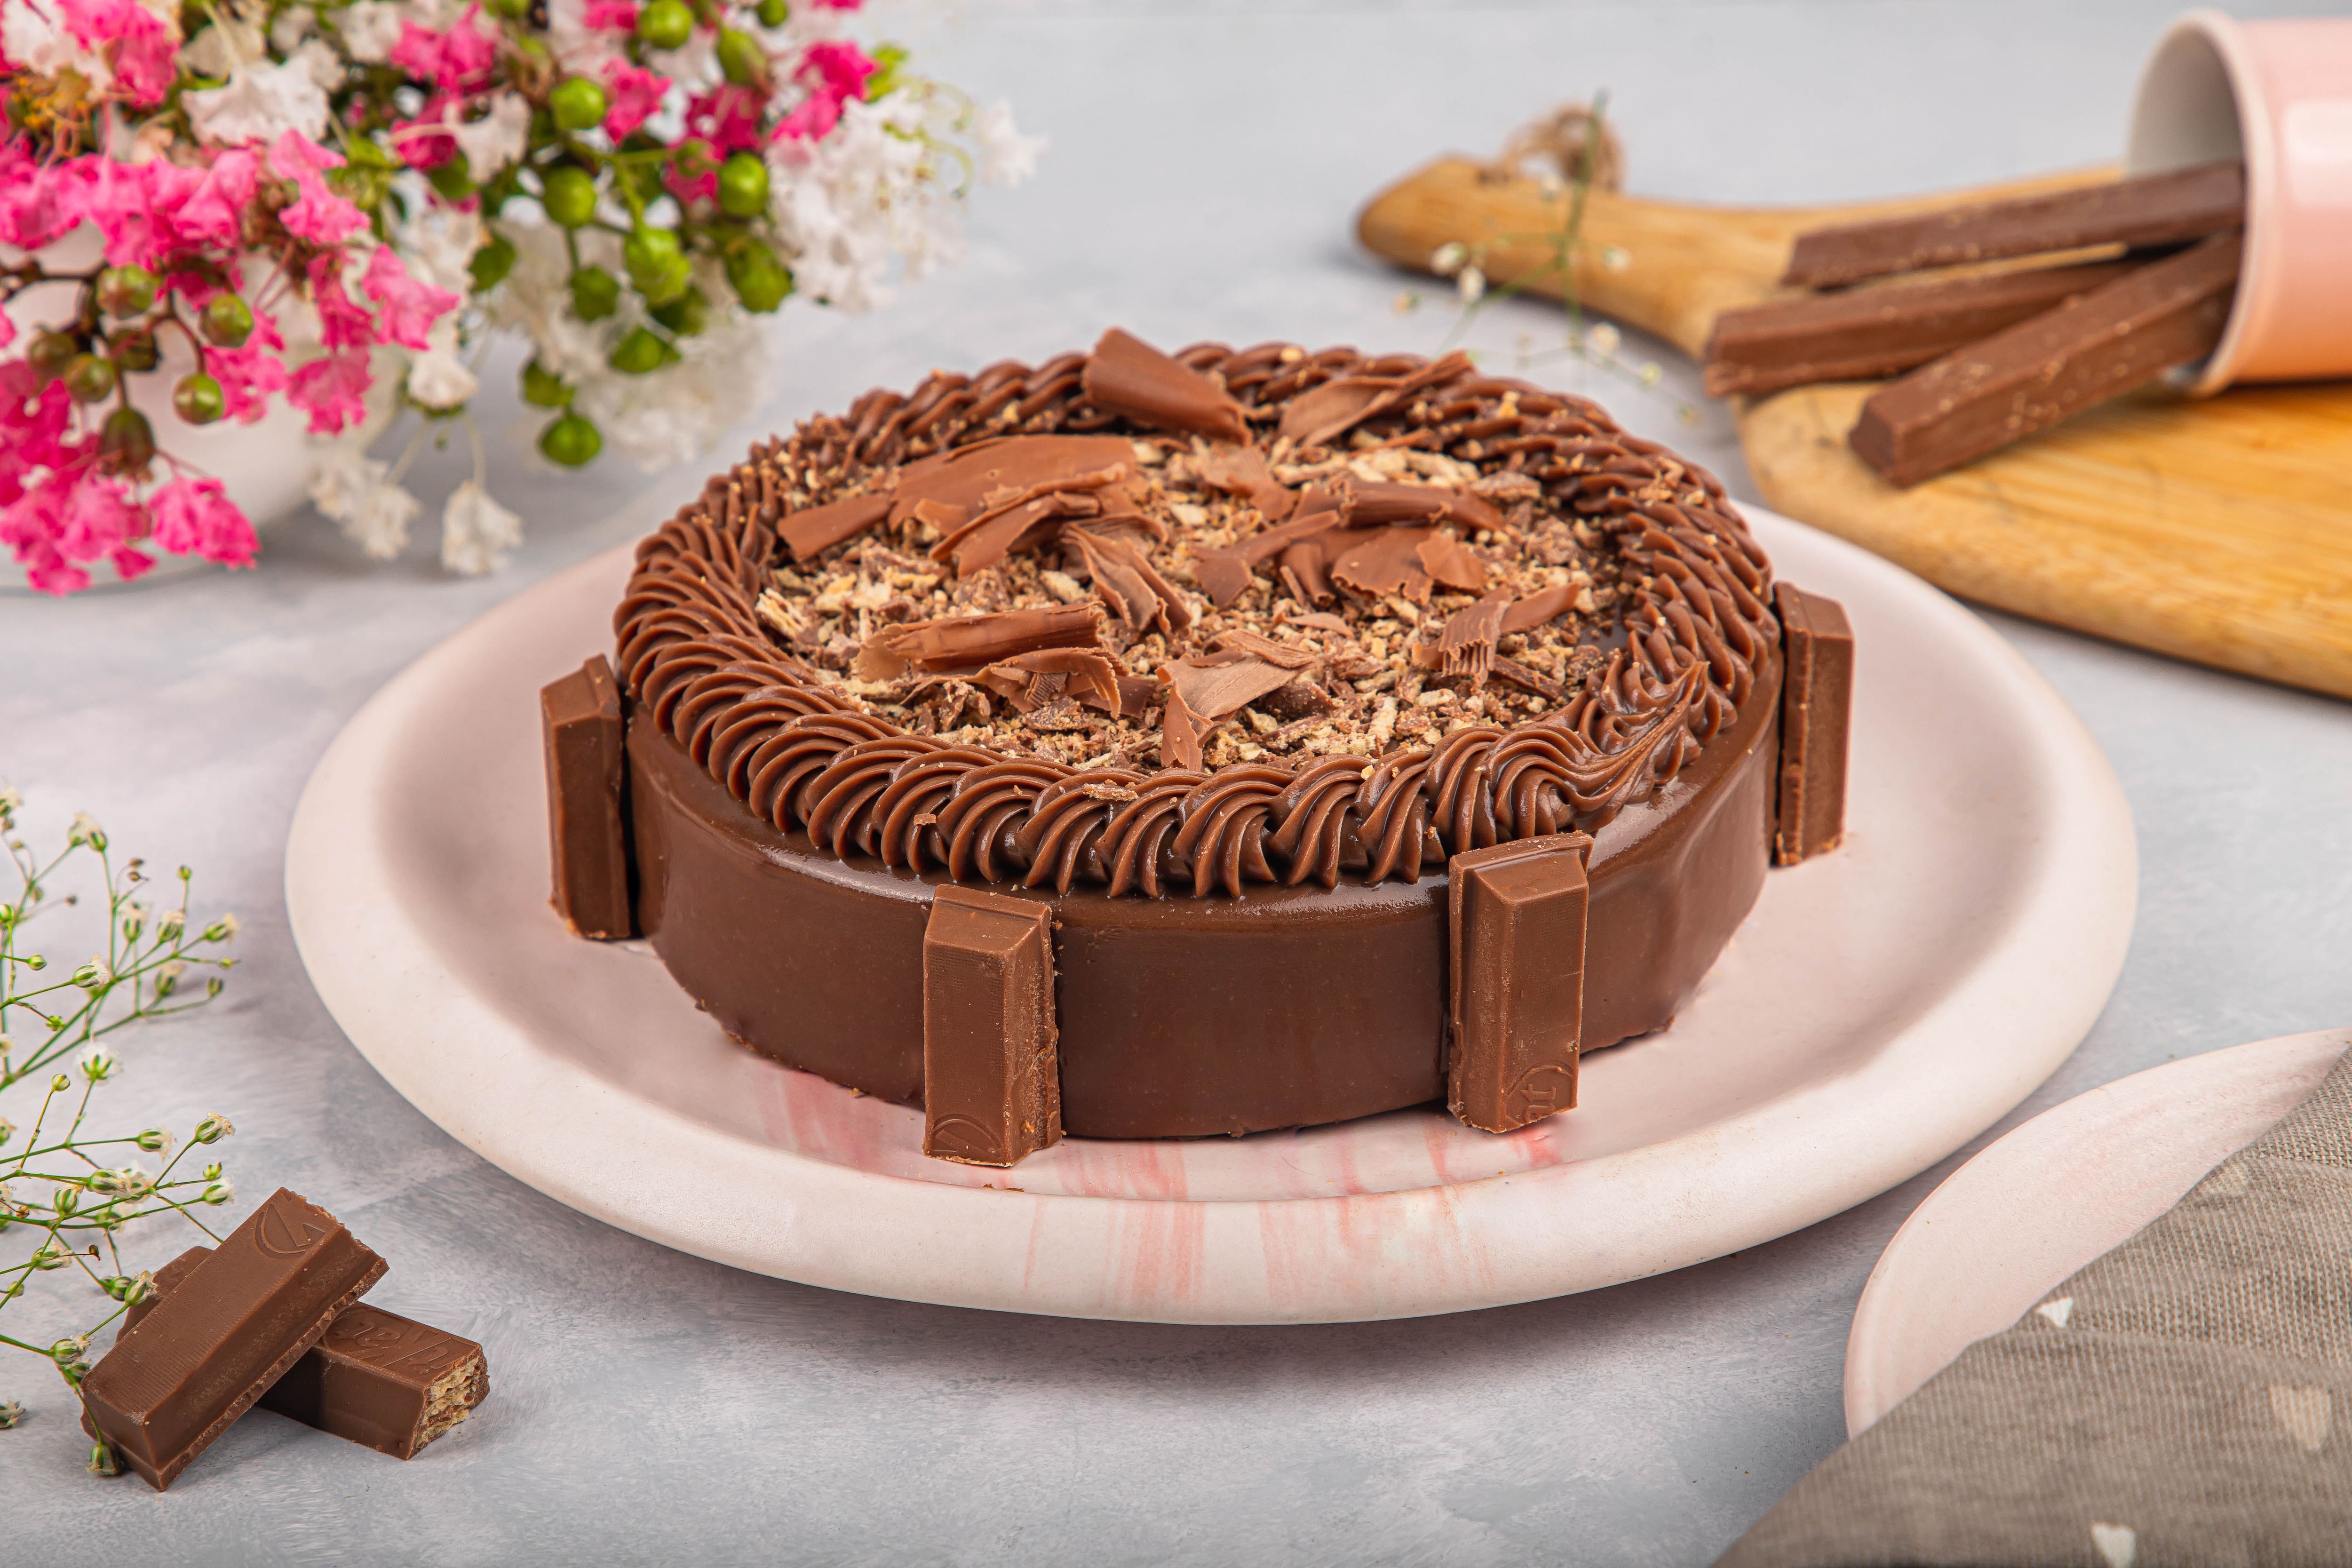 Lotus Biscoff CheeseCake in Gurgoan  Lotus Biscoff Cake Delivery Sohna  Road – thecococompany